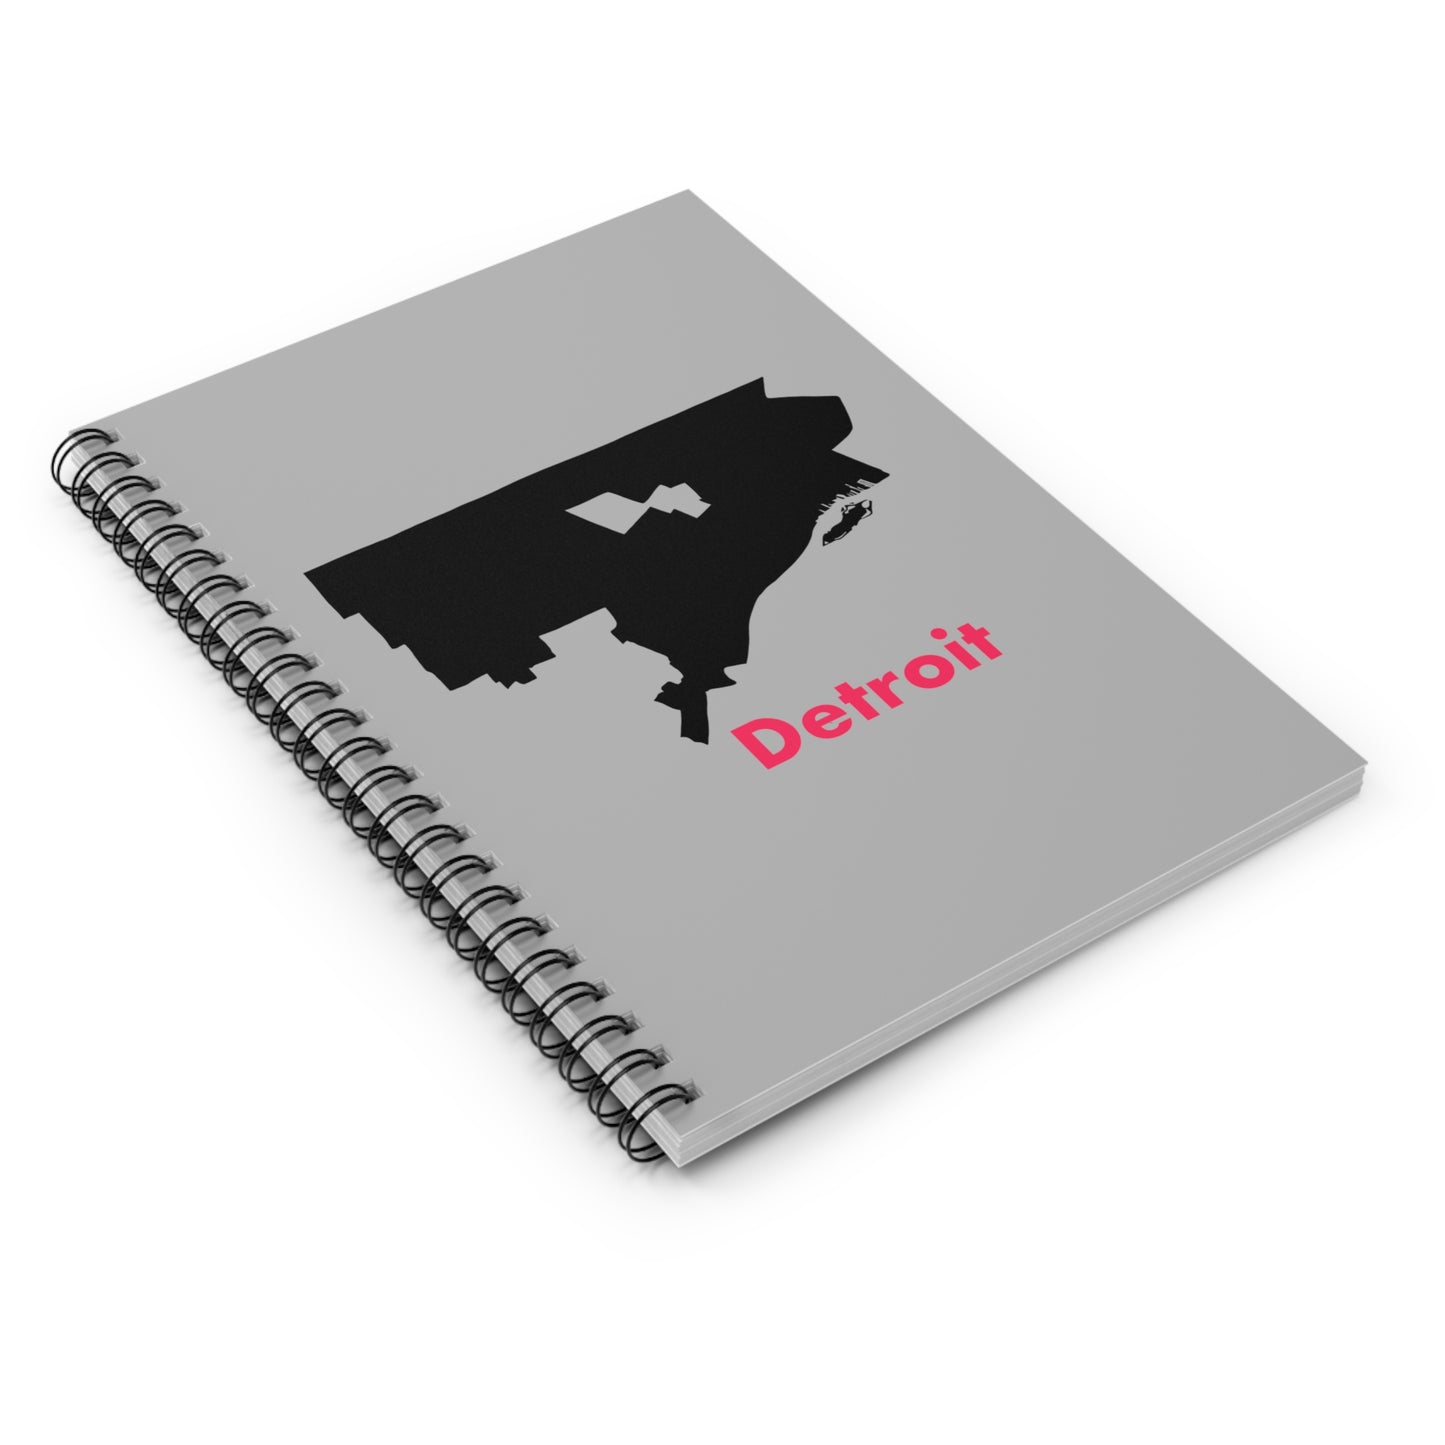 Detroit in Black and Hot Pink Spiral Notebook - Ruled Line